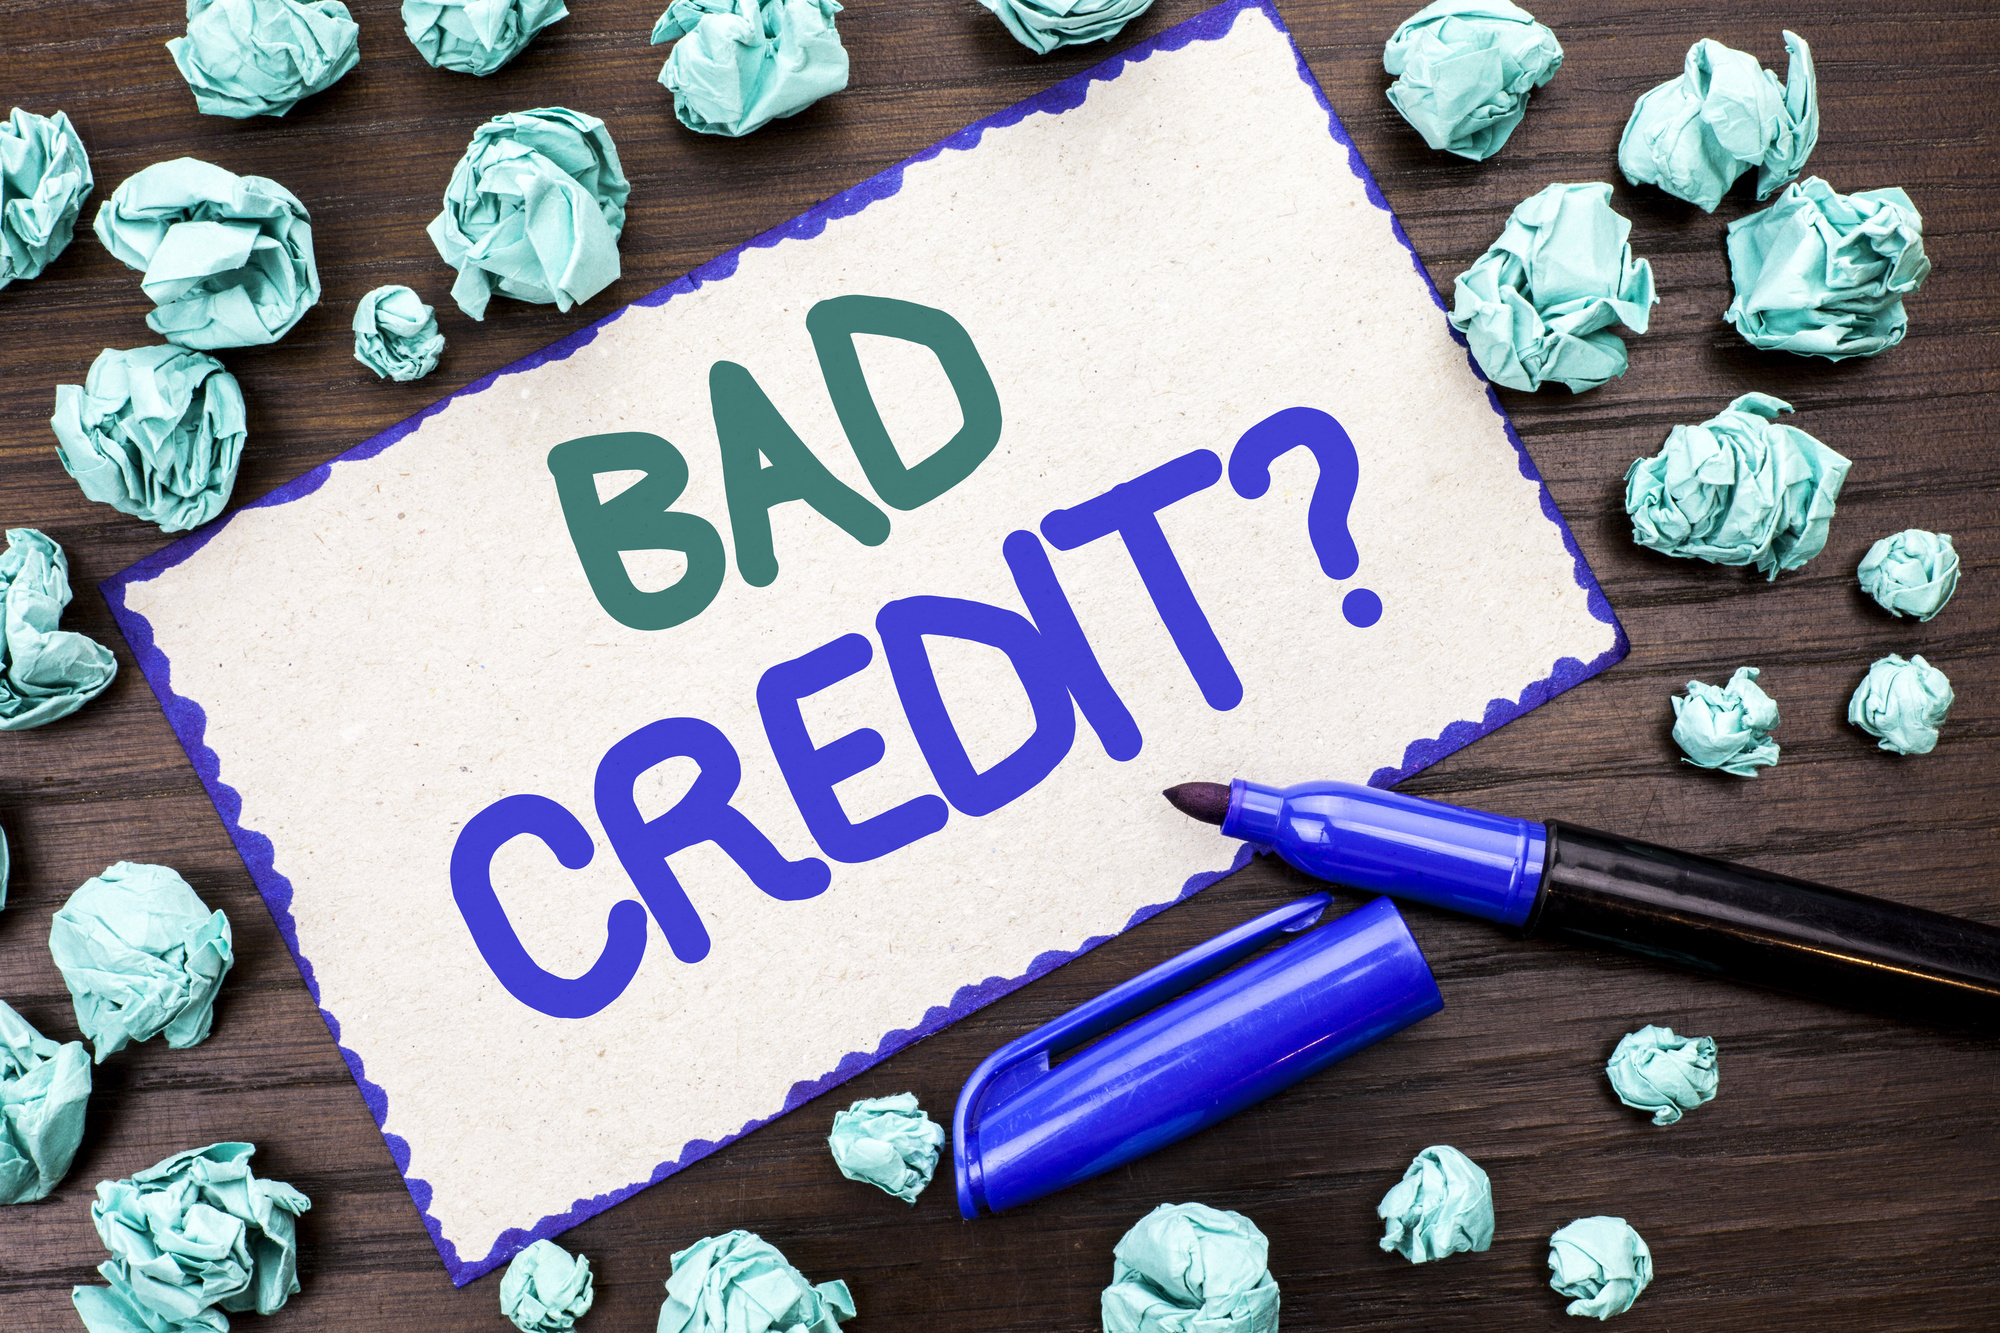 What You Need to Know About Getting a Car With Bad Credit